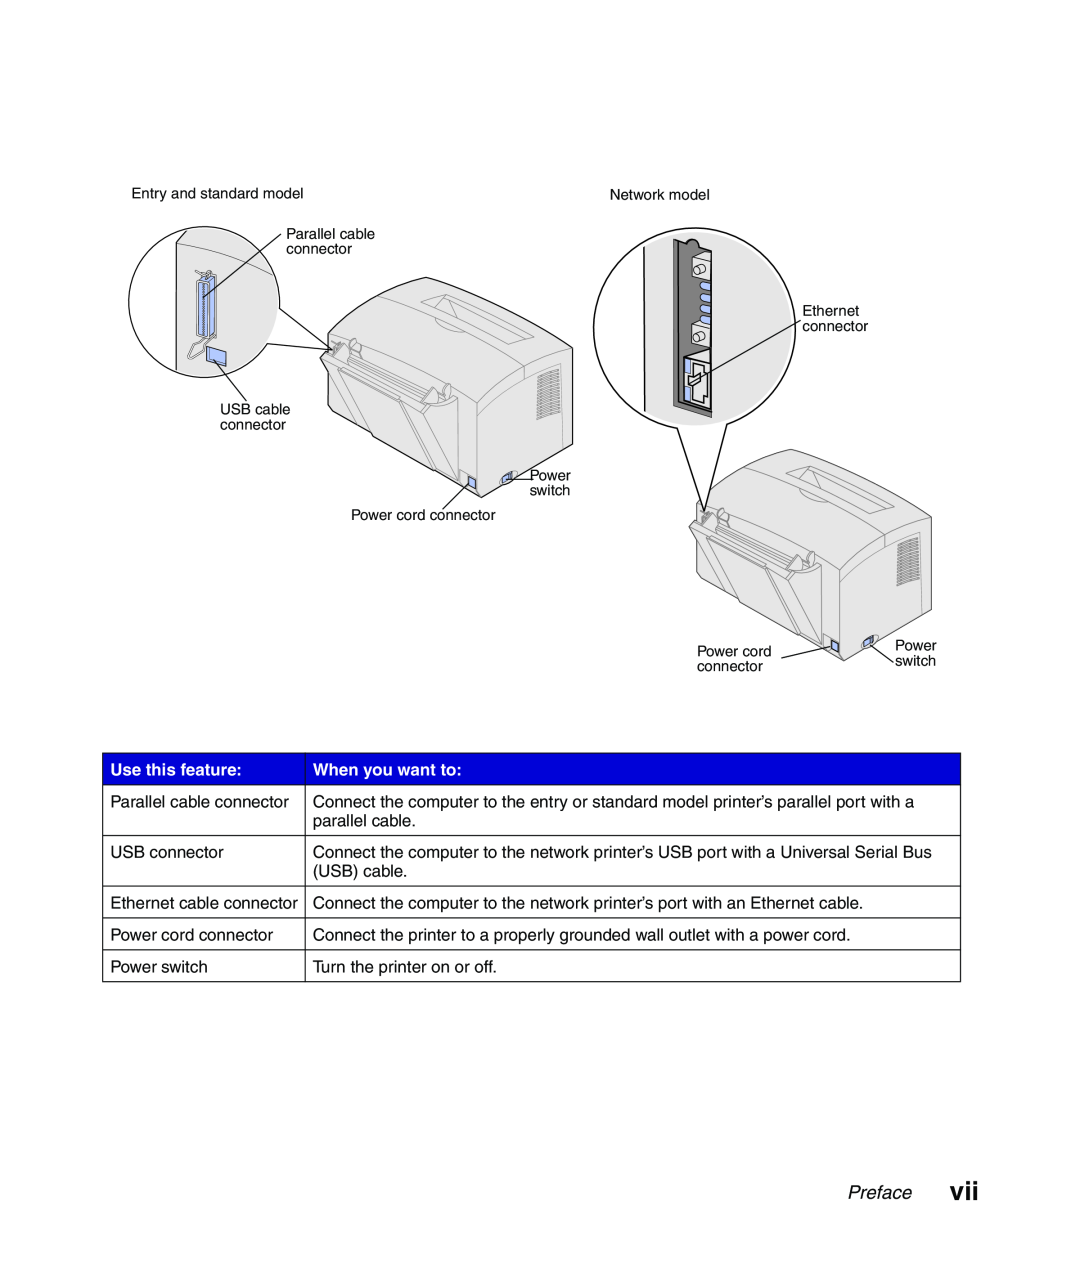 Lexmark Infoprint 1116 setup guide Preface, Use this feature, When you want to, Parallel cable connector 